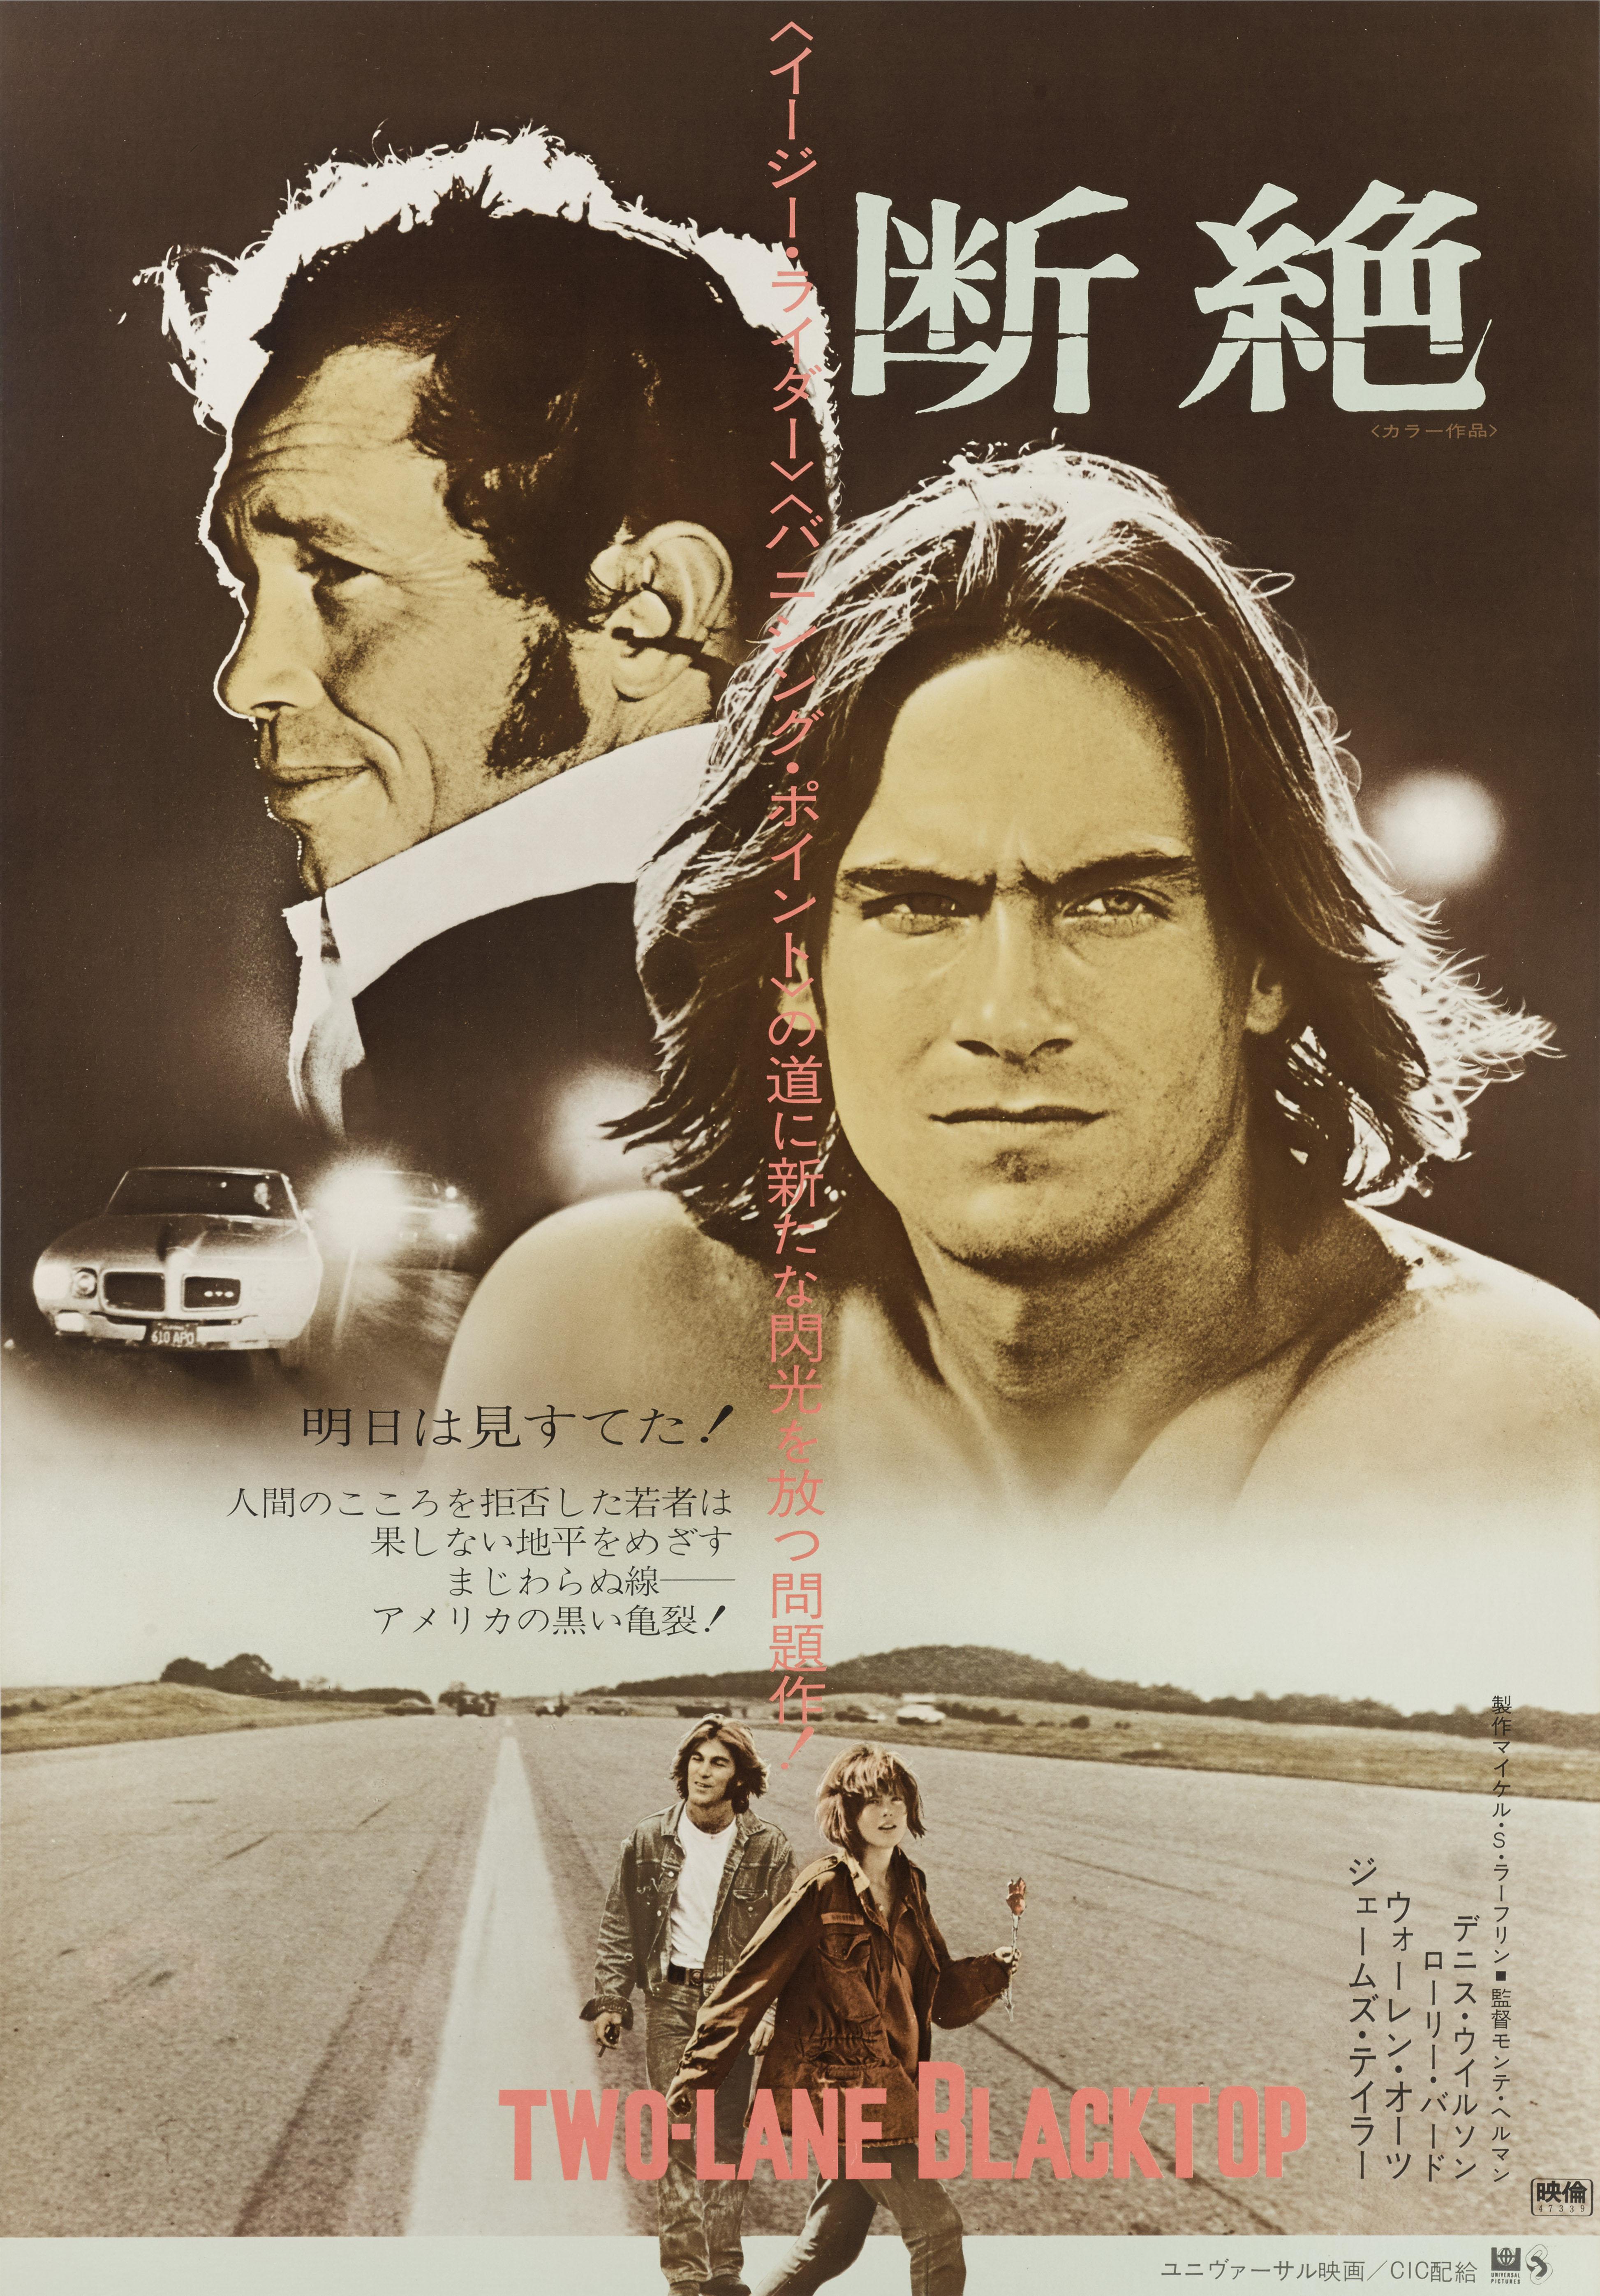 Original Japanese film poster for the film Two-Lane Blacktop, 1971.
The film was directed by Monte Hellman and starred James Taylor, Warren Oates. The artwork on this poster is unique to the films Japanese release The poster is in near mint